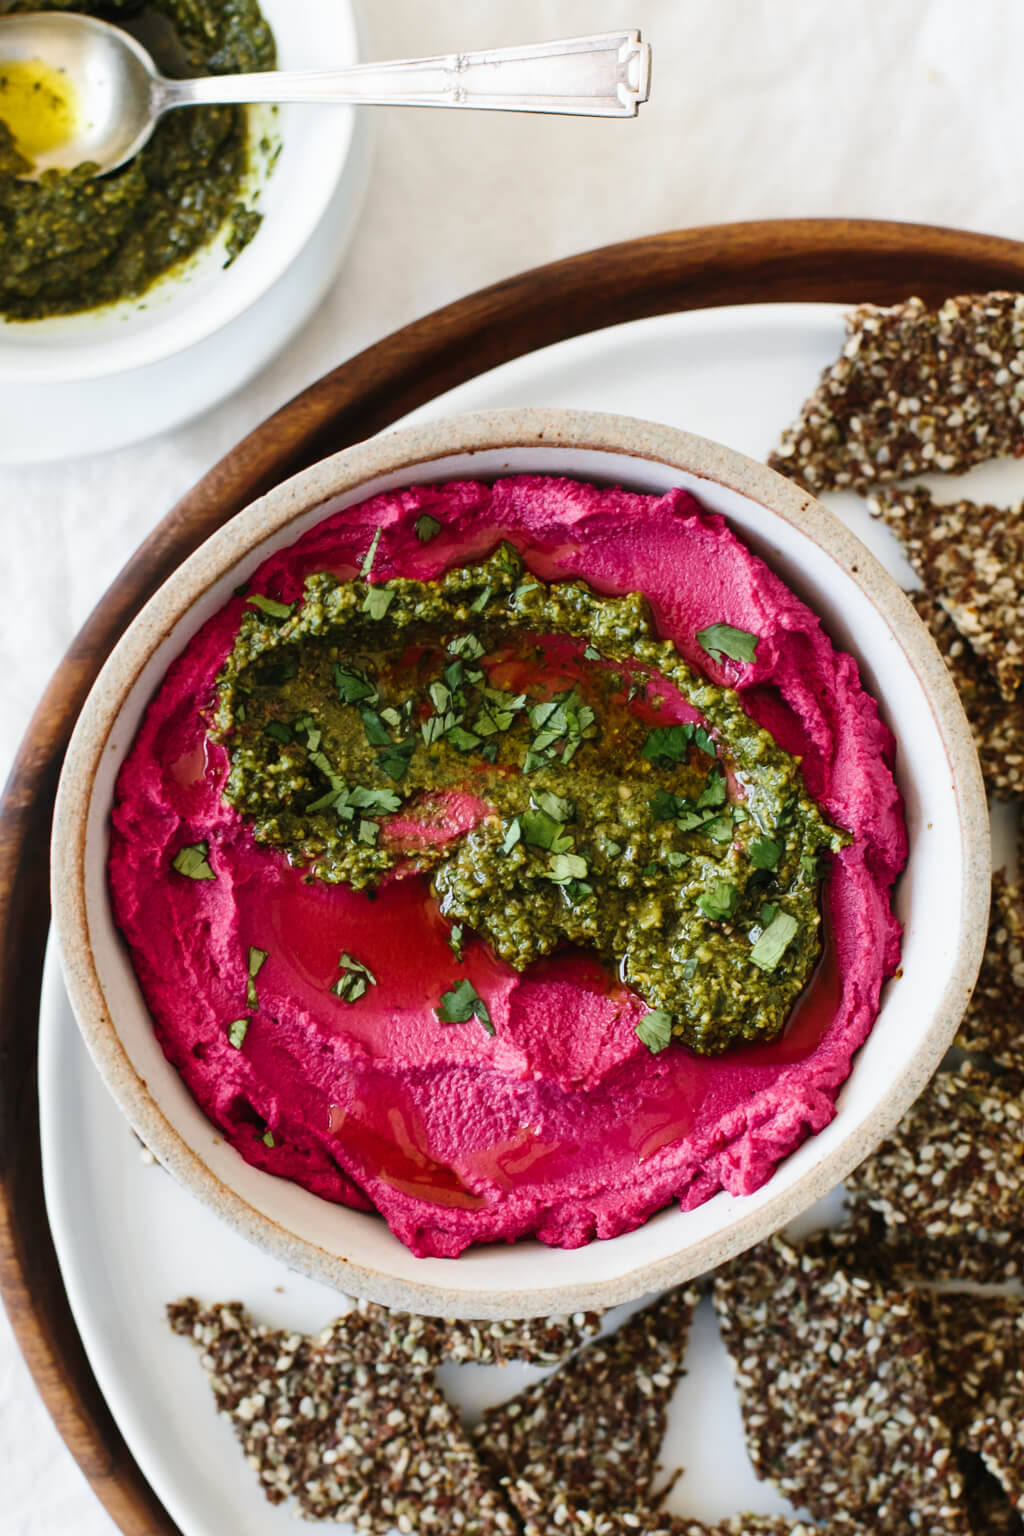 Beet hummus is made with oven roasted beets, chickpeas, tahini, olive oil, lemon juice and garlic. It's a vibrant and healthy snack or appetizer recipe.